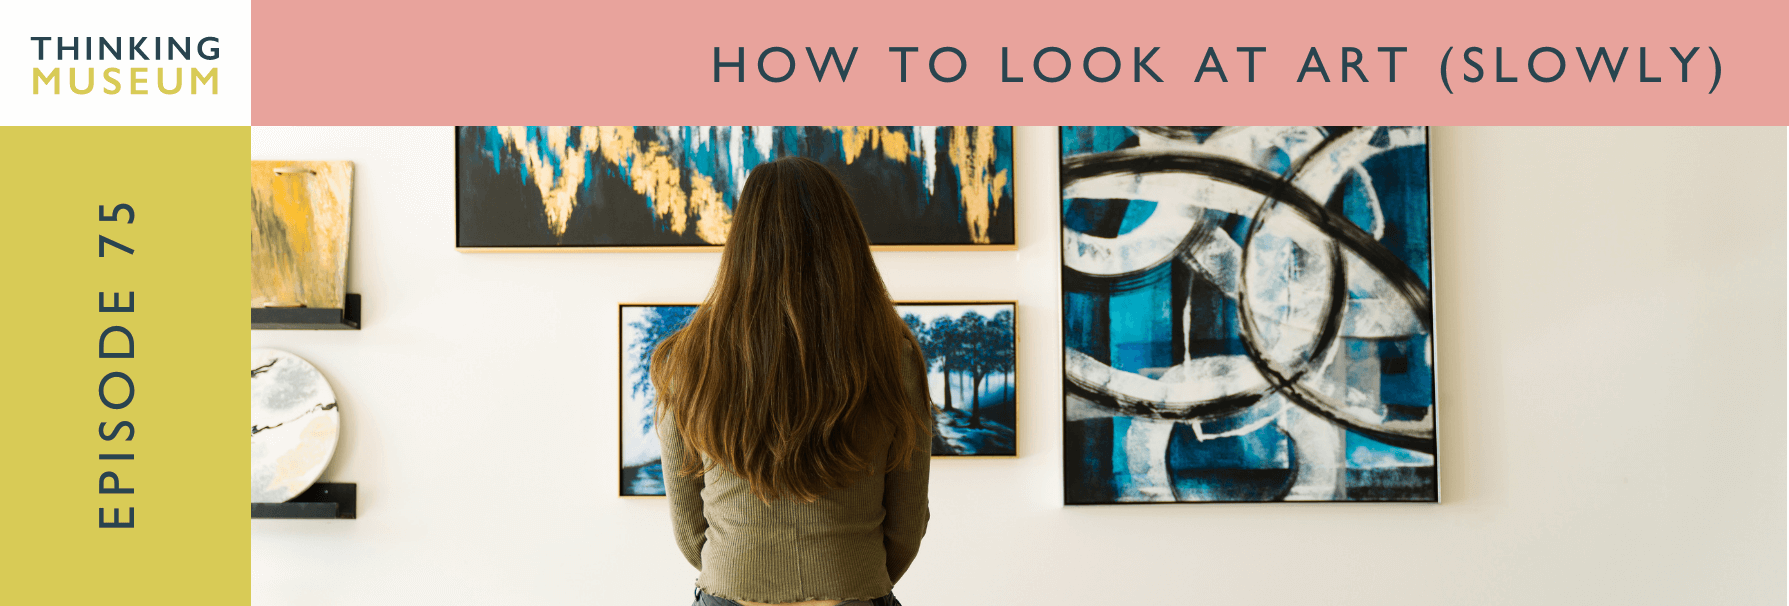 How to look at art slowly